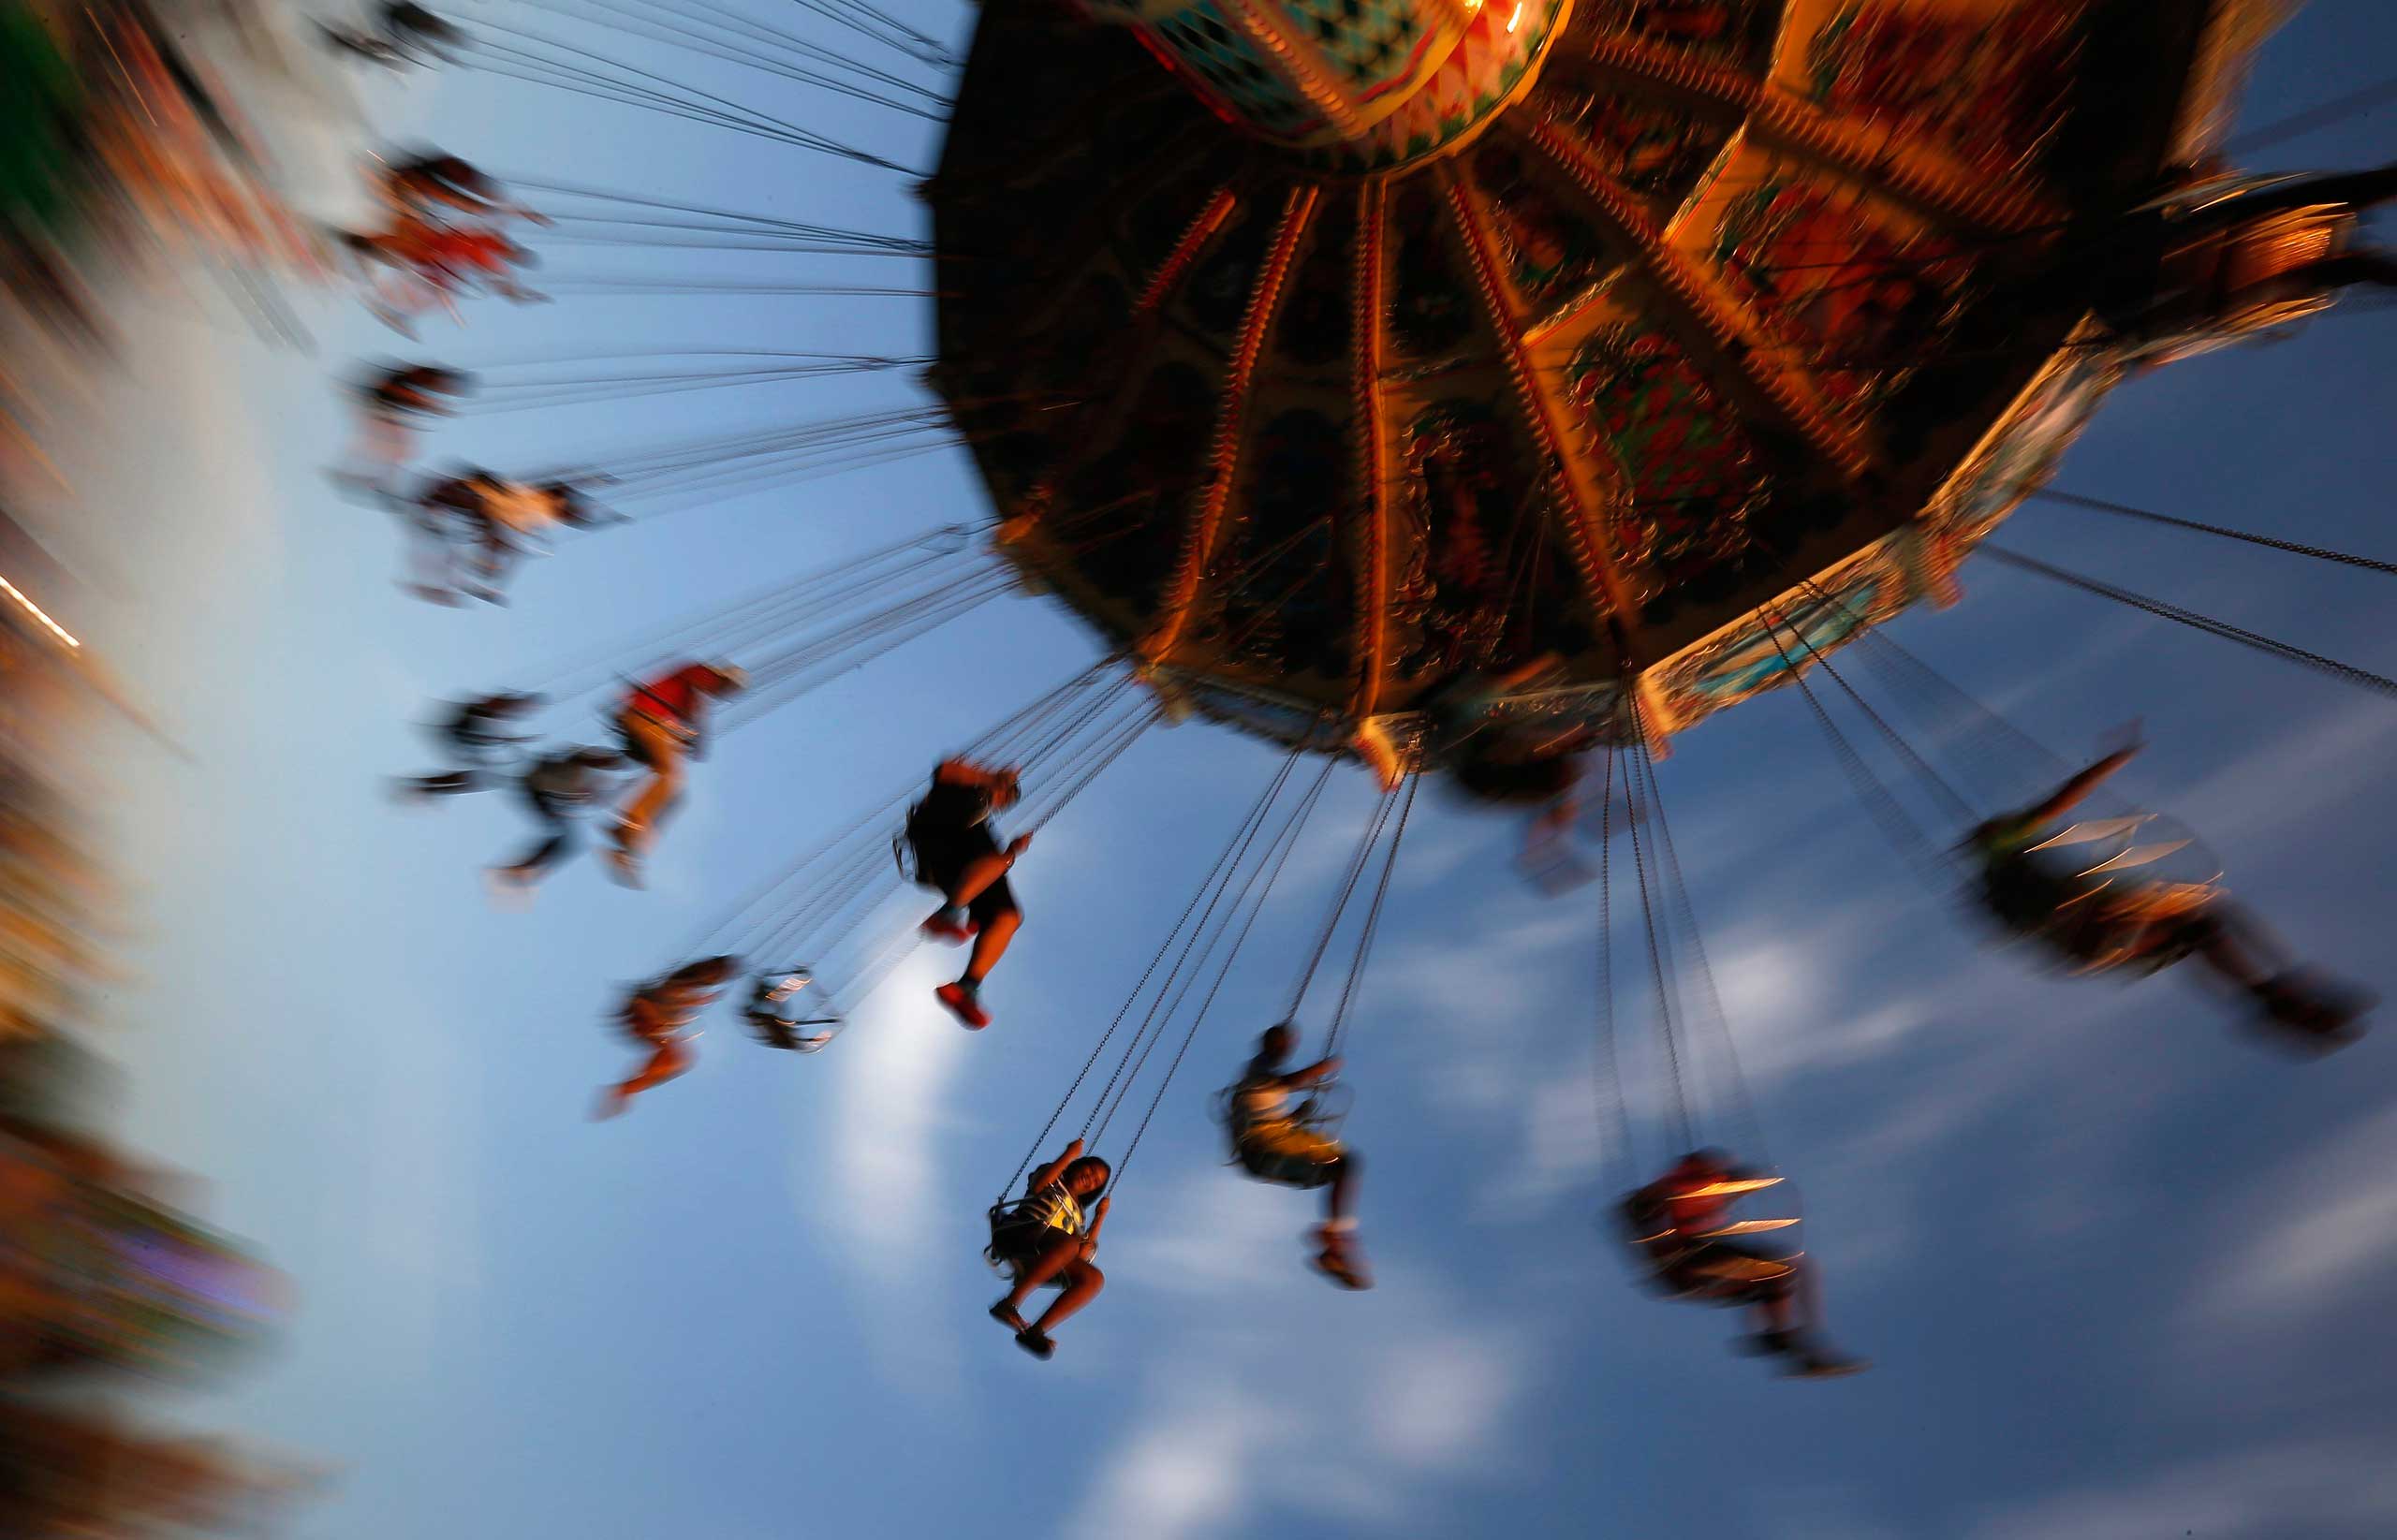 People ride on a swing at the Wisconsin State Fair in West Allis, Wisconsin, August 9, 2014. The fair started over 150 years ago and mixes agricultural exhibits with amusements rides.